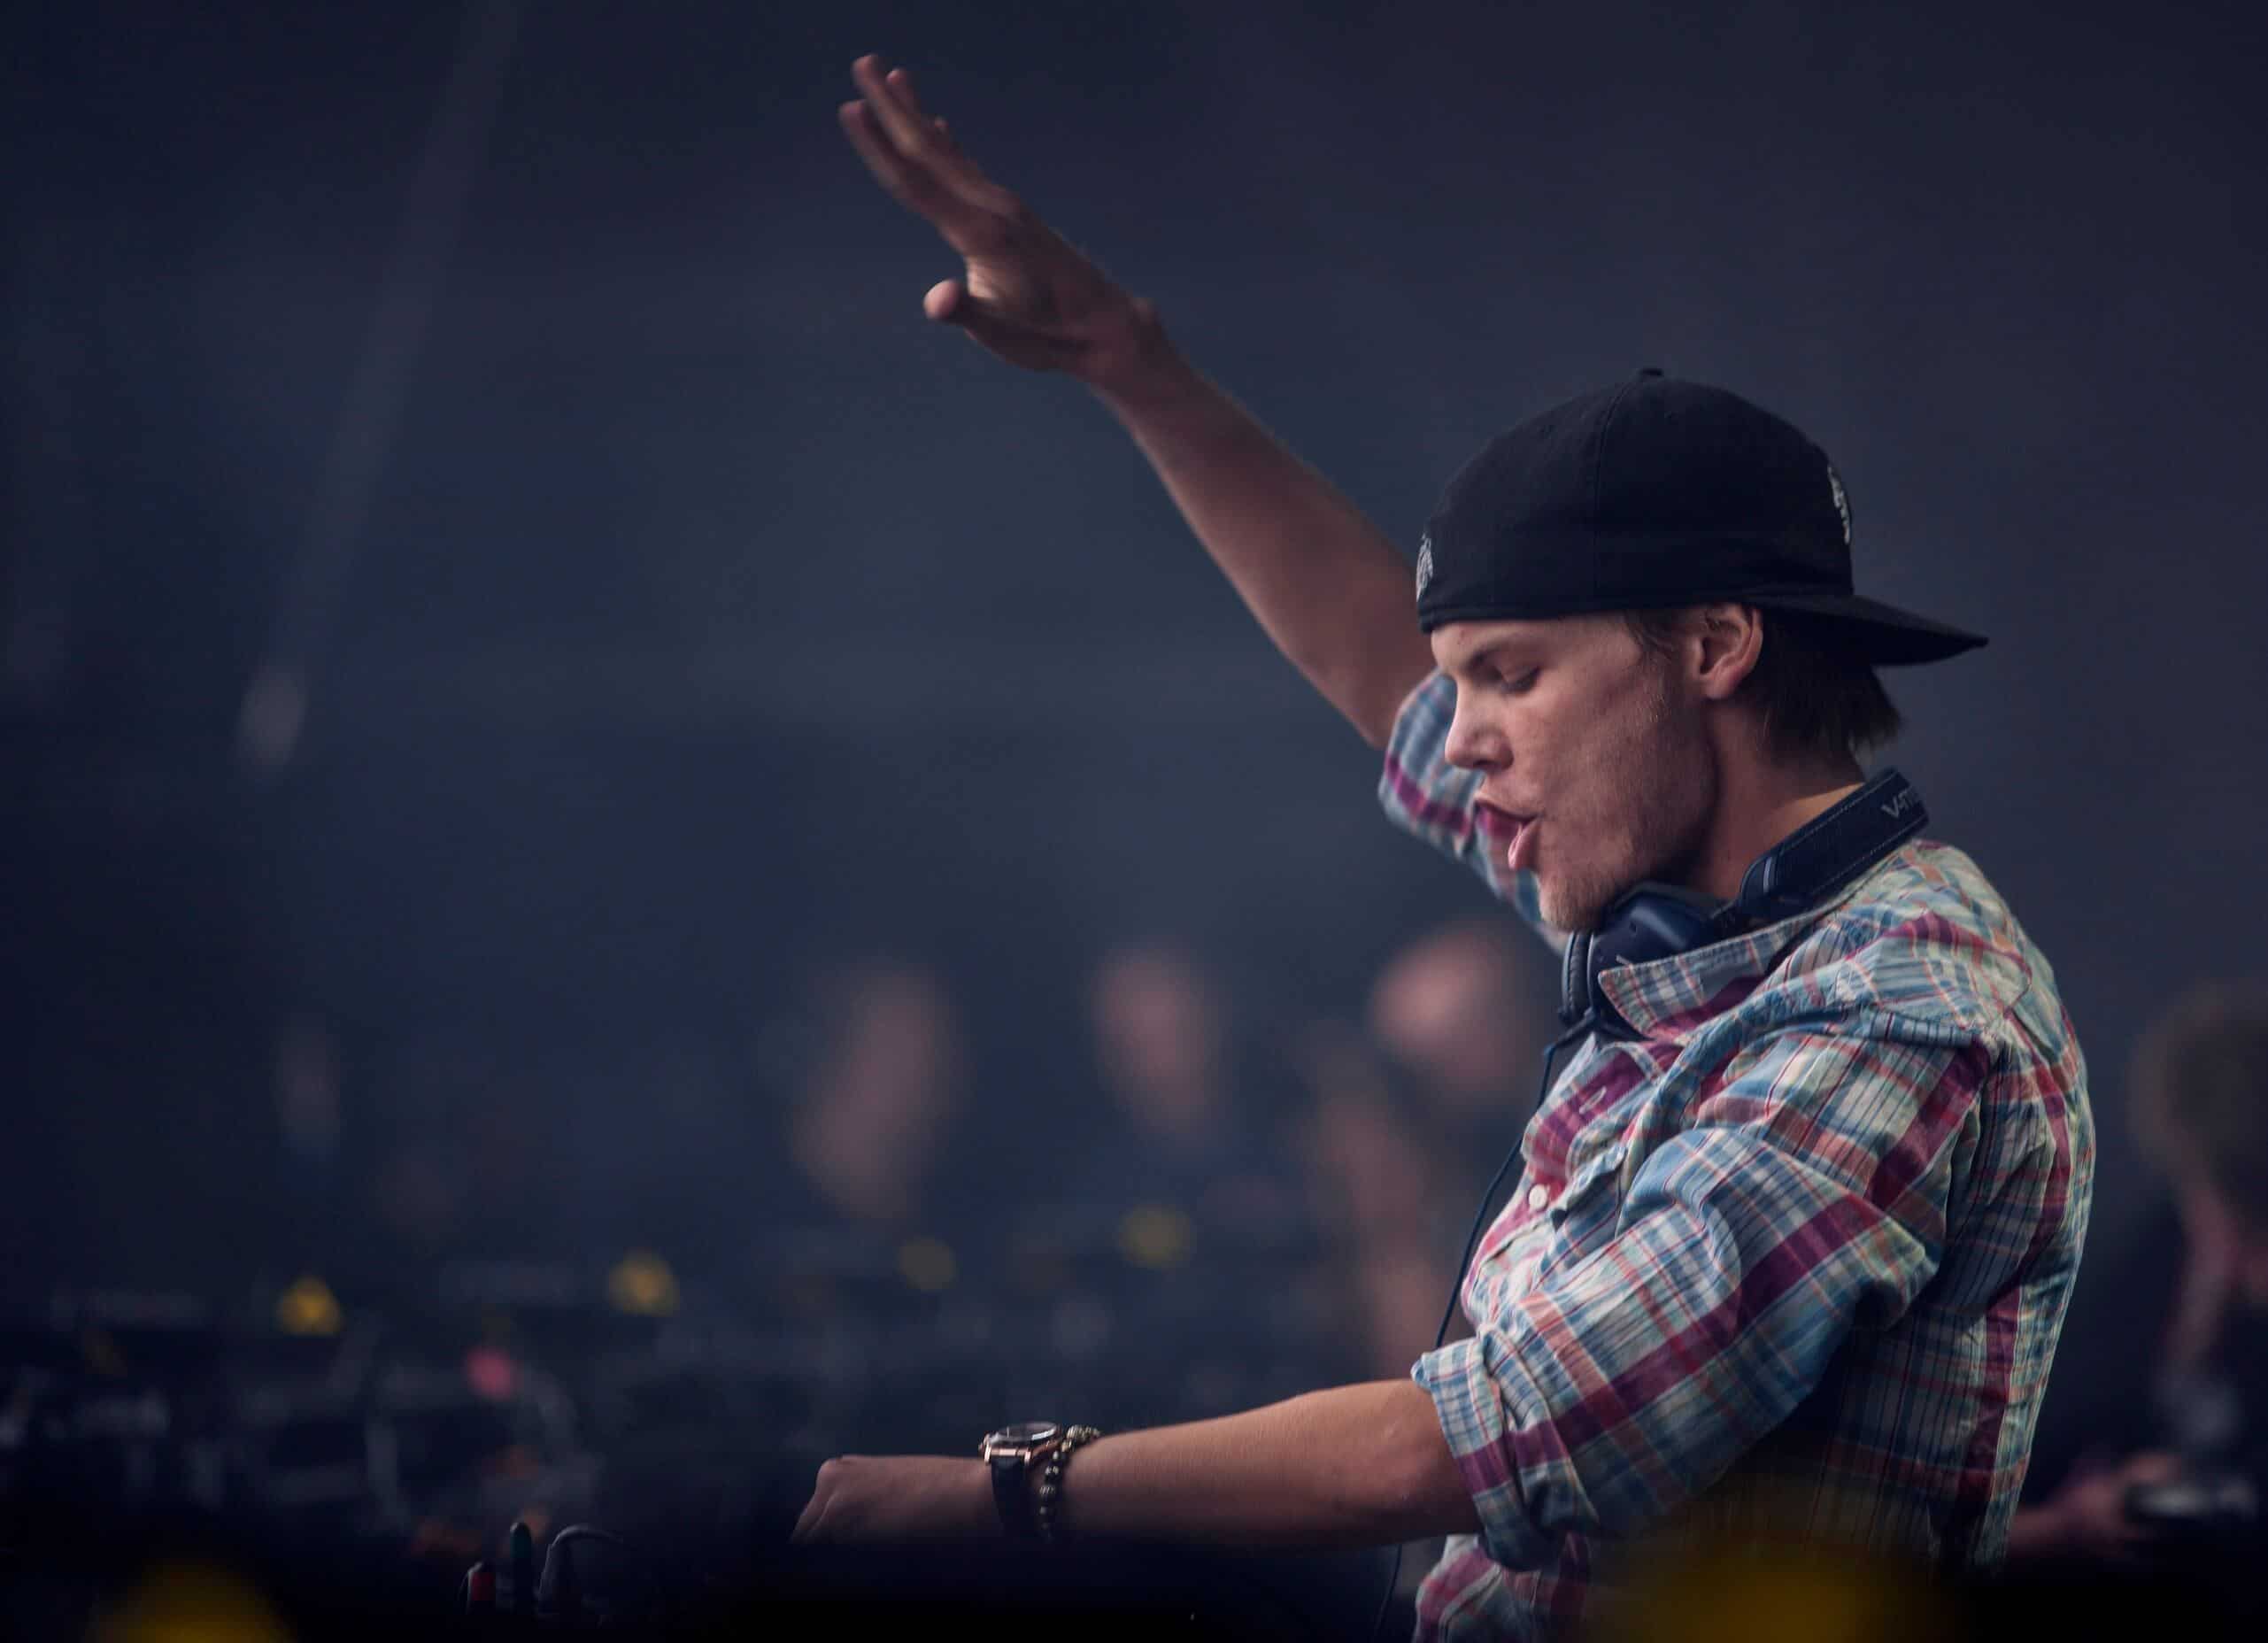 Avicii: Witness the creation of ‘Wake Me Up’ with Aloe Blacc in new video